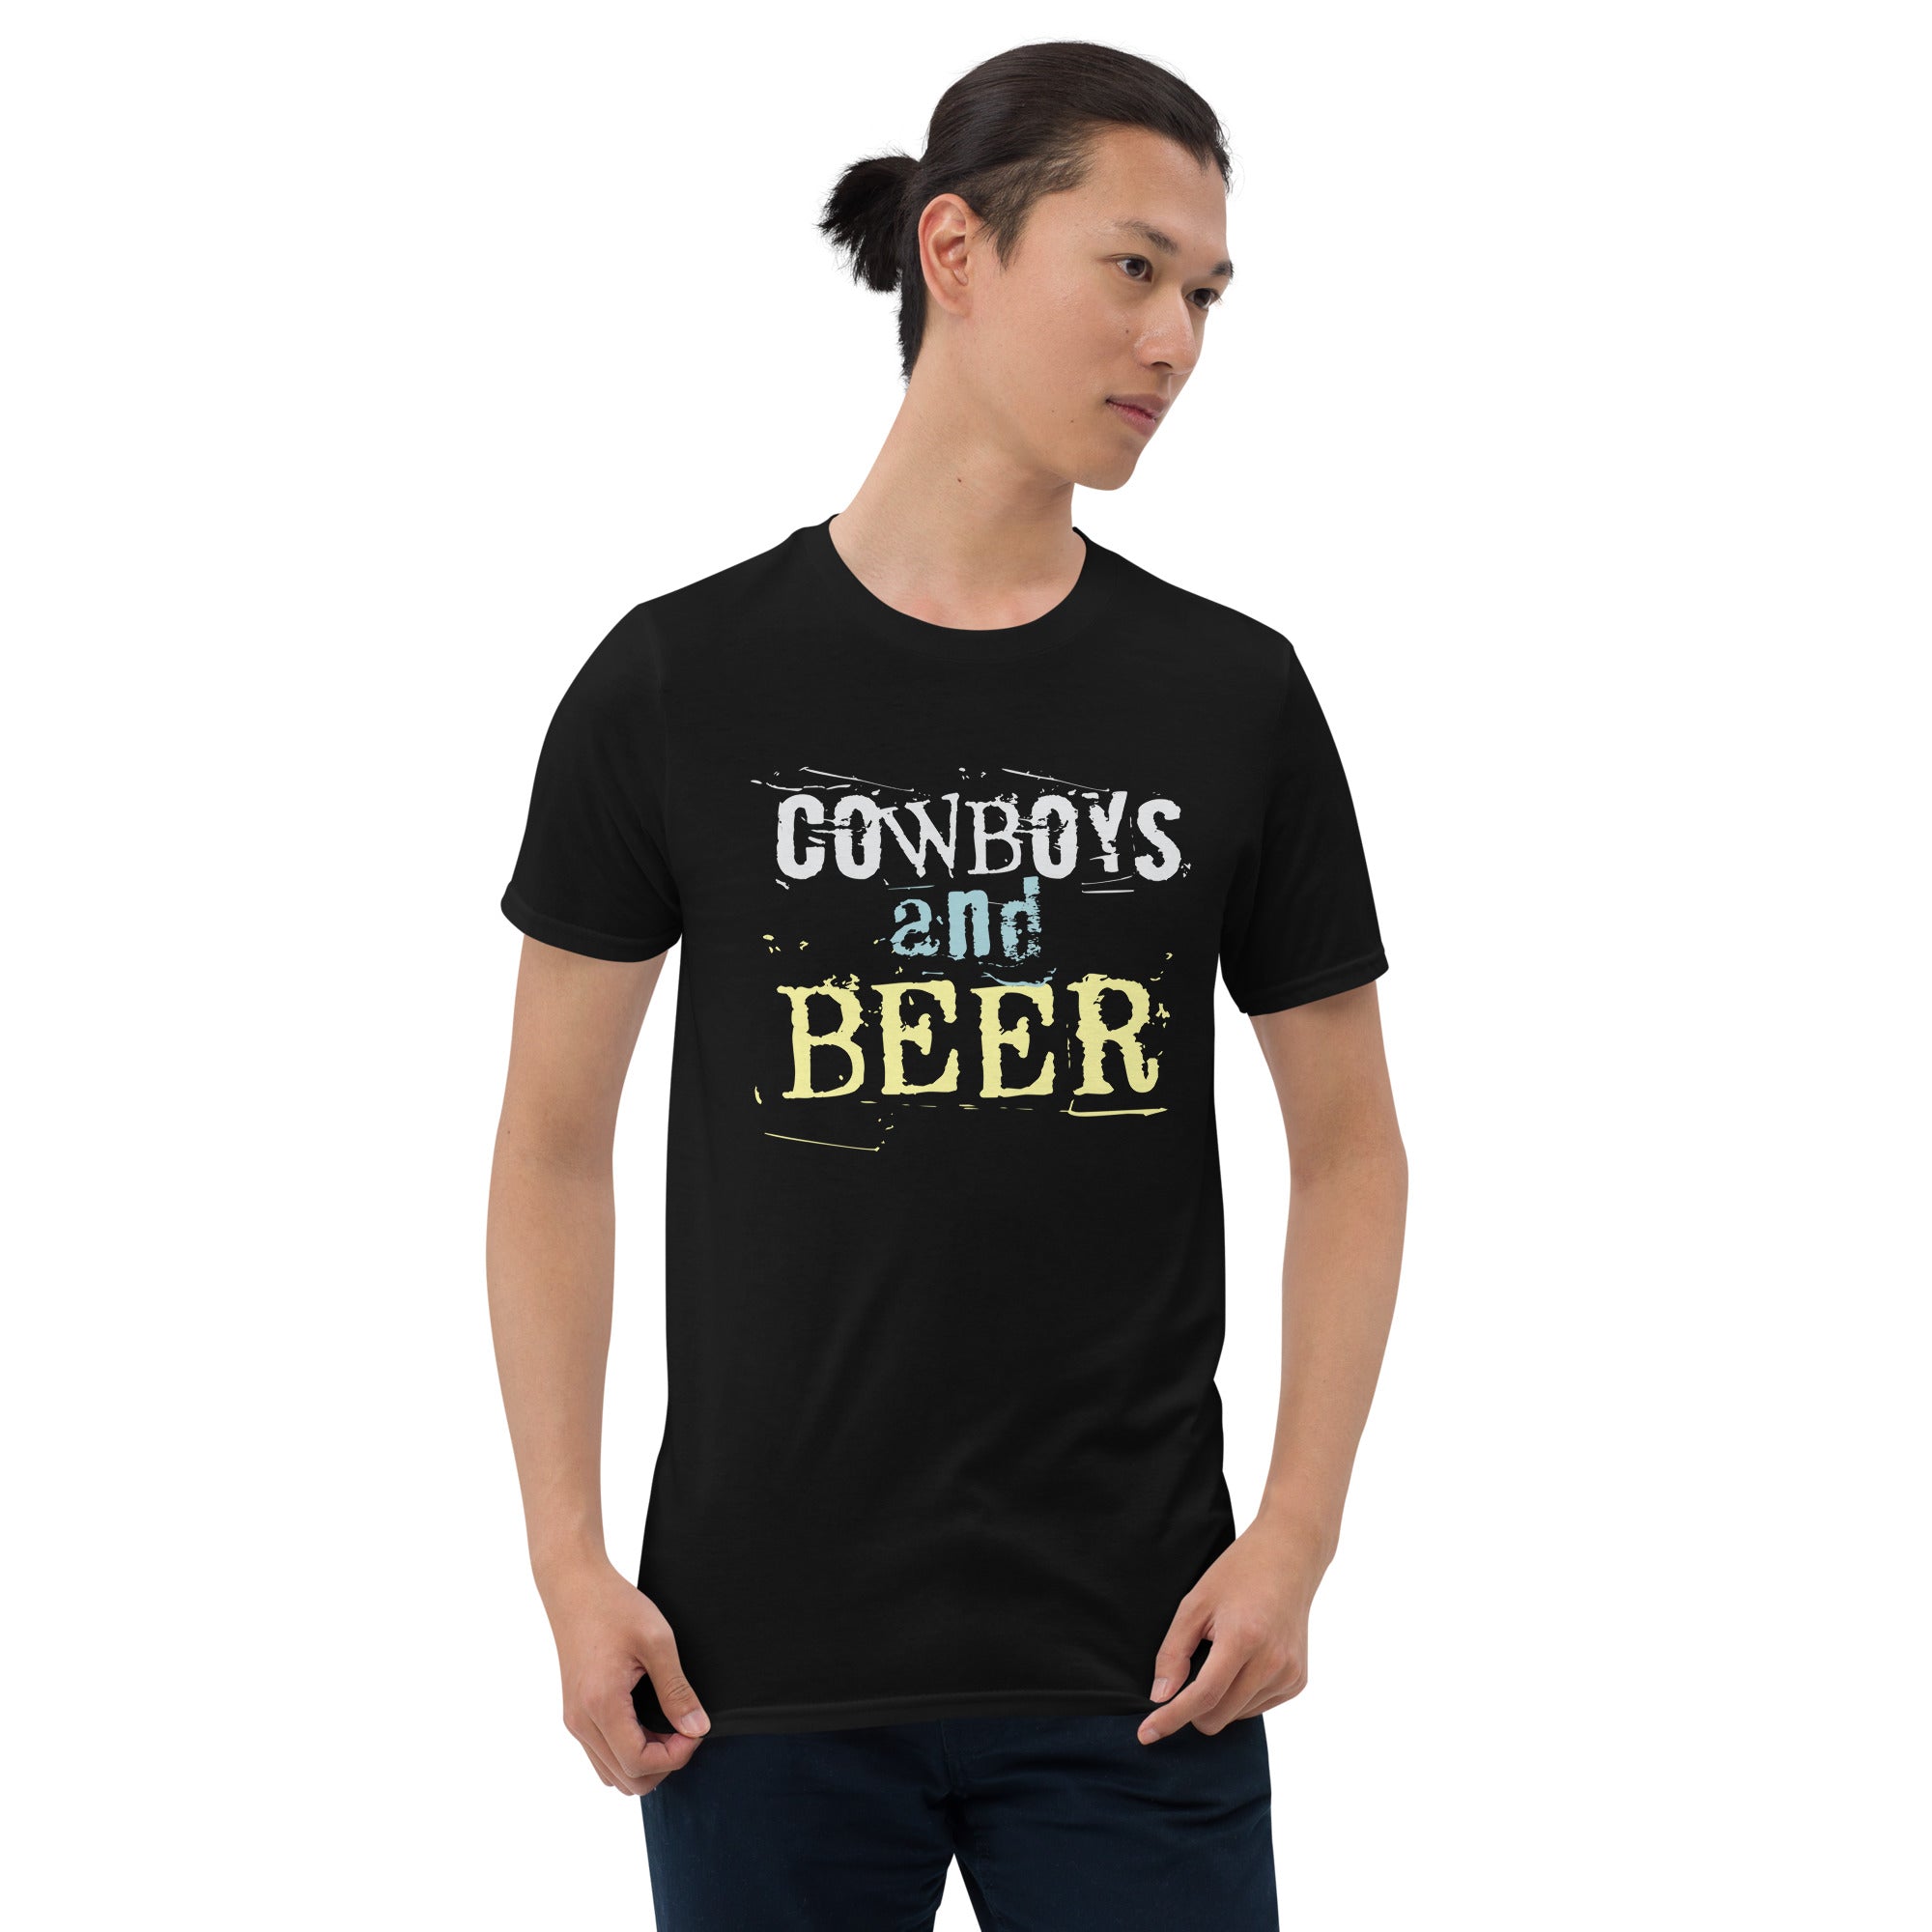 Cowboys And Beer - Short-Sleeve Unisex T-Shirt